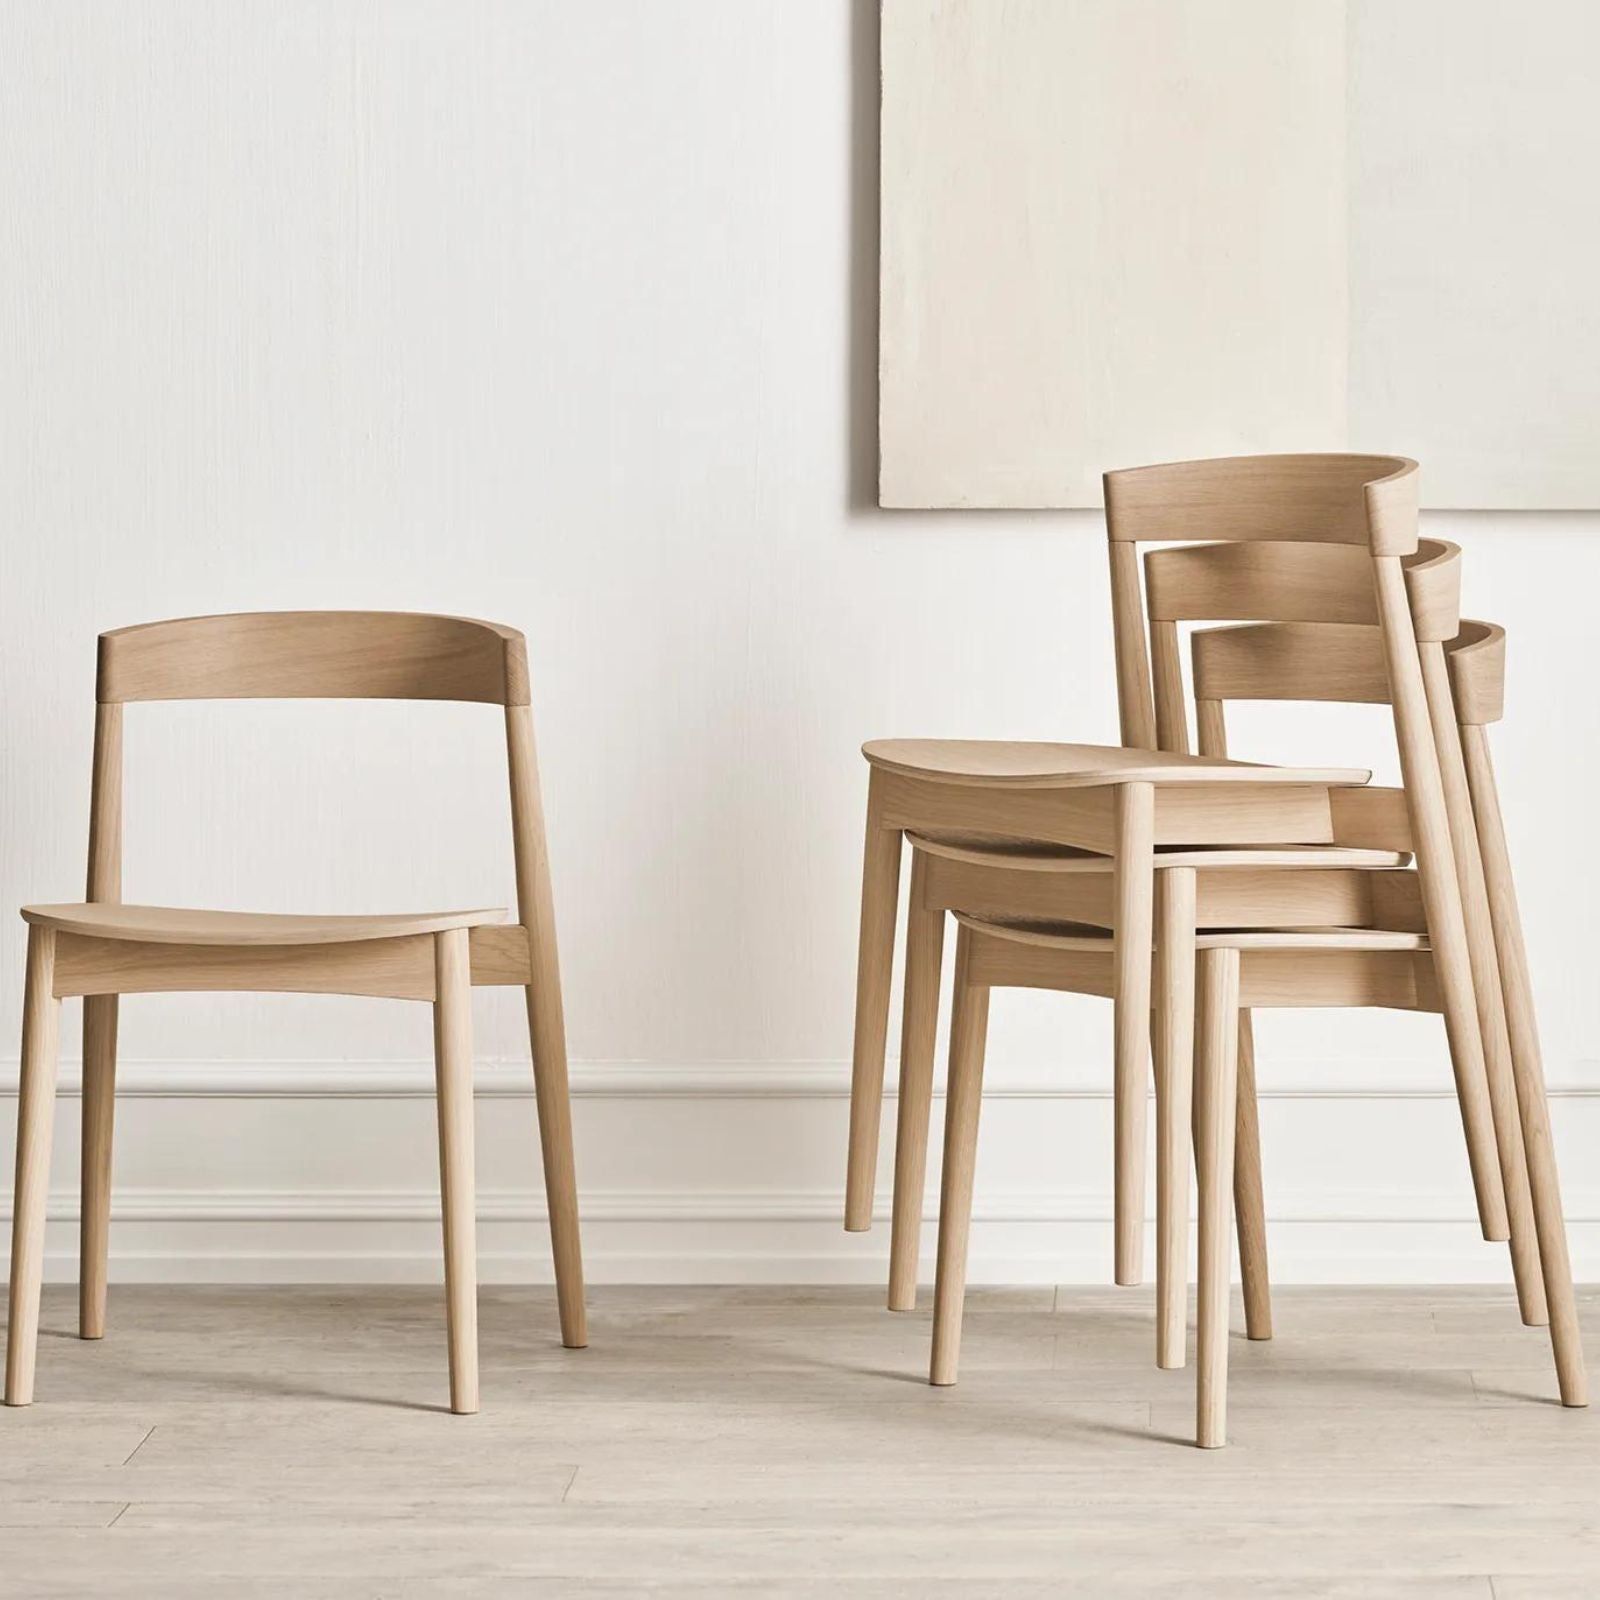 Optimize Your Space with Stackable Chairs